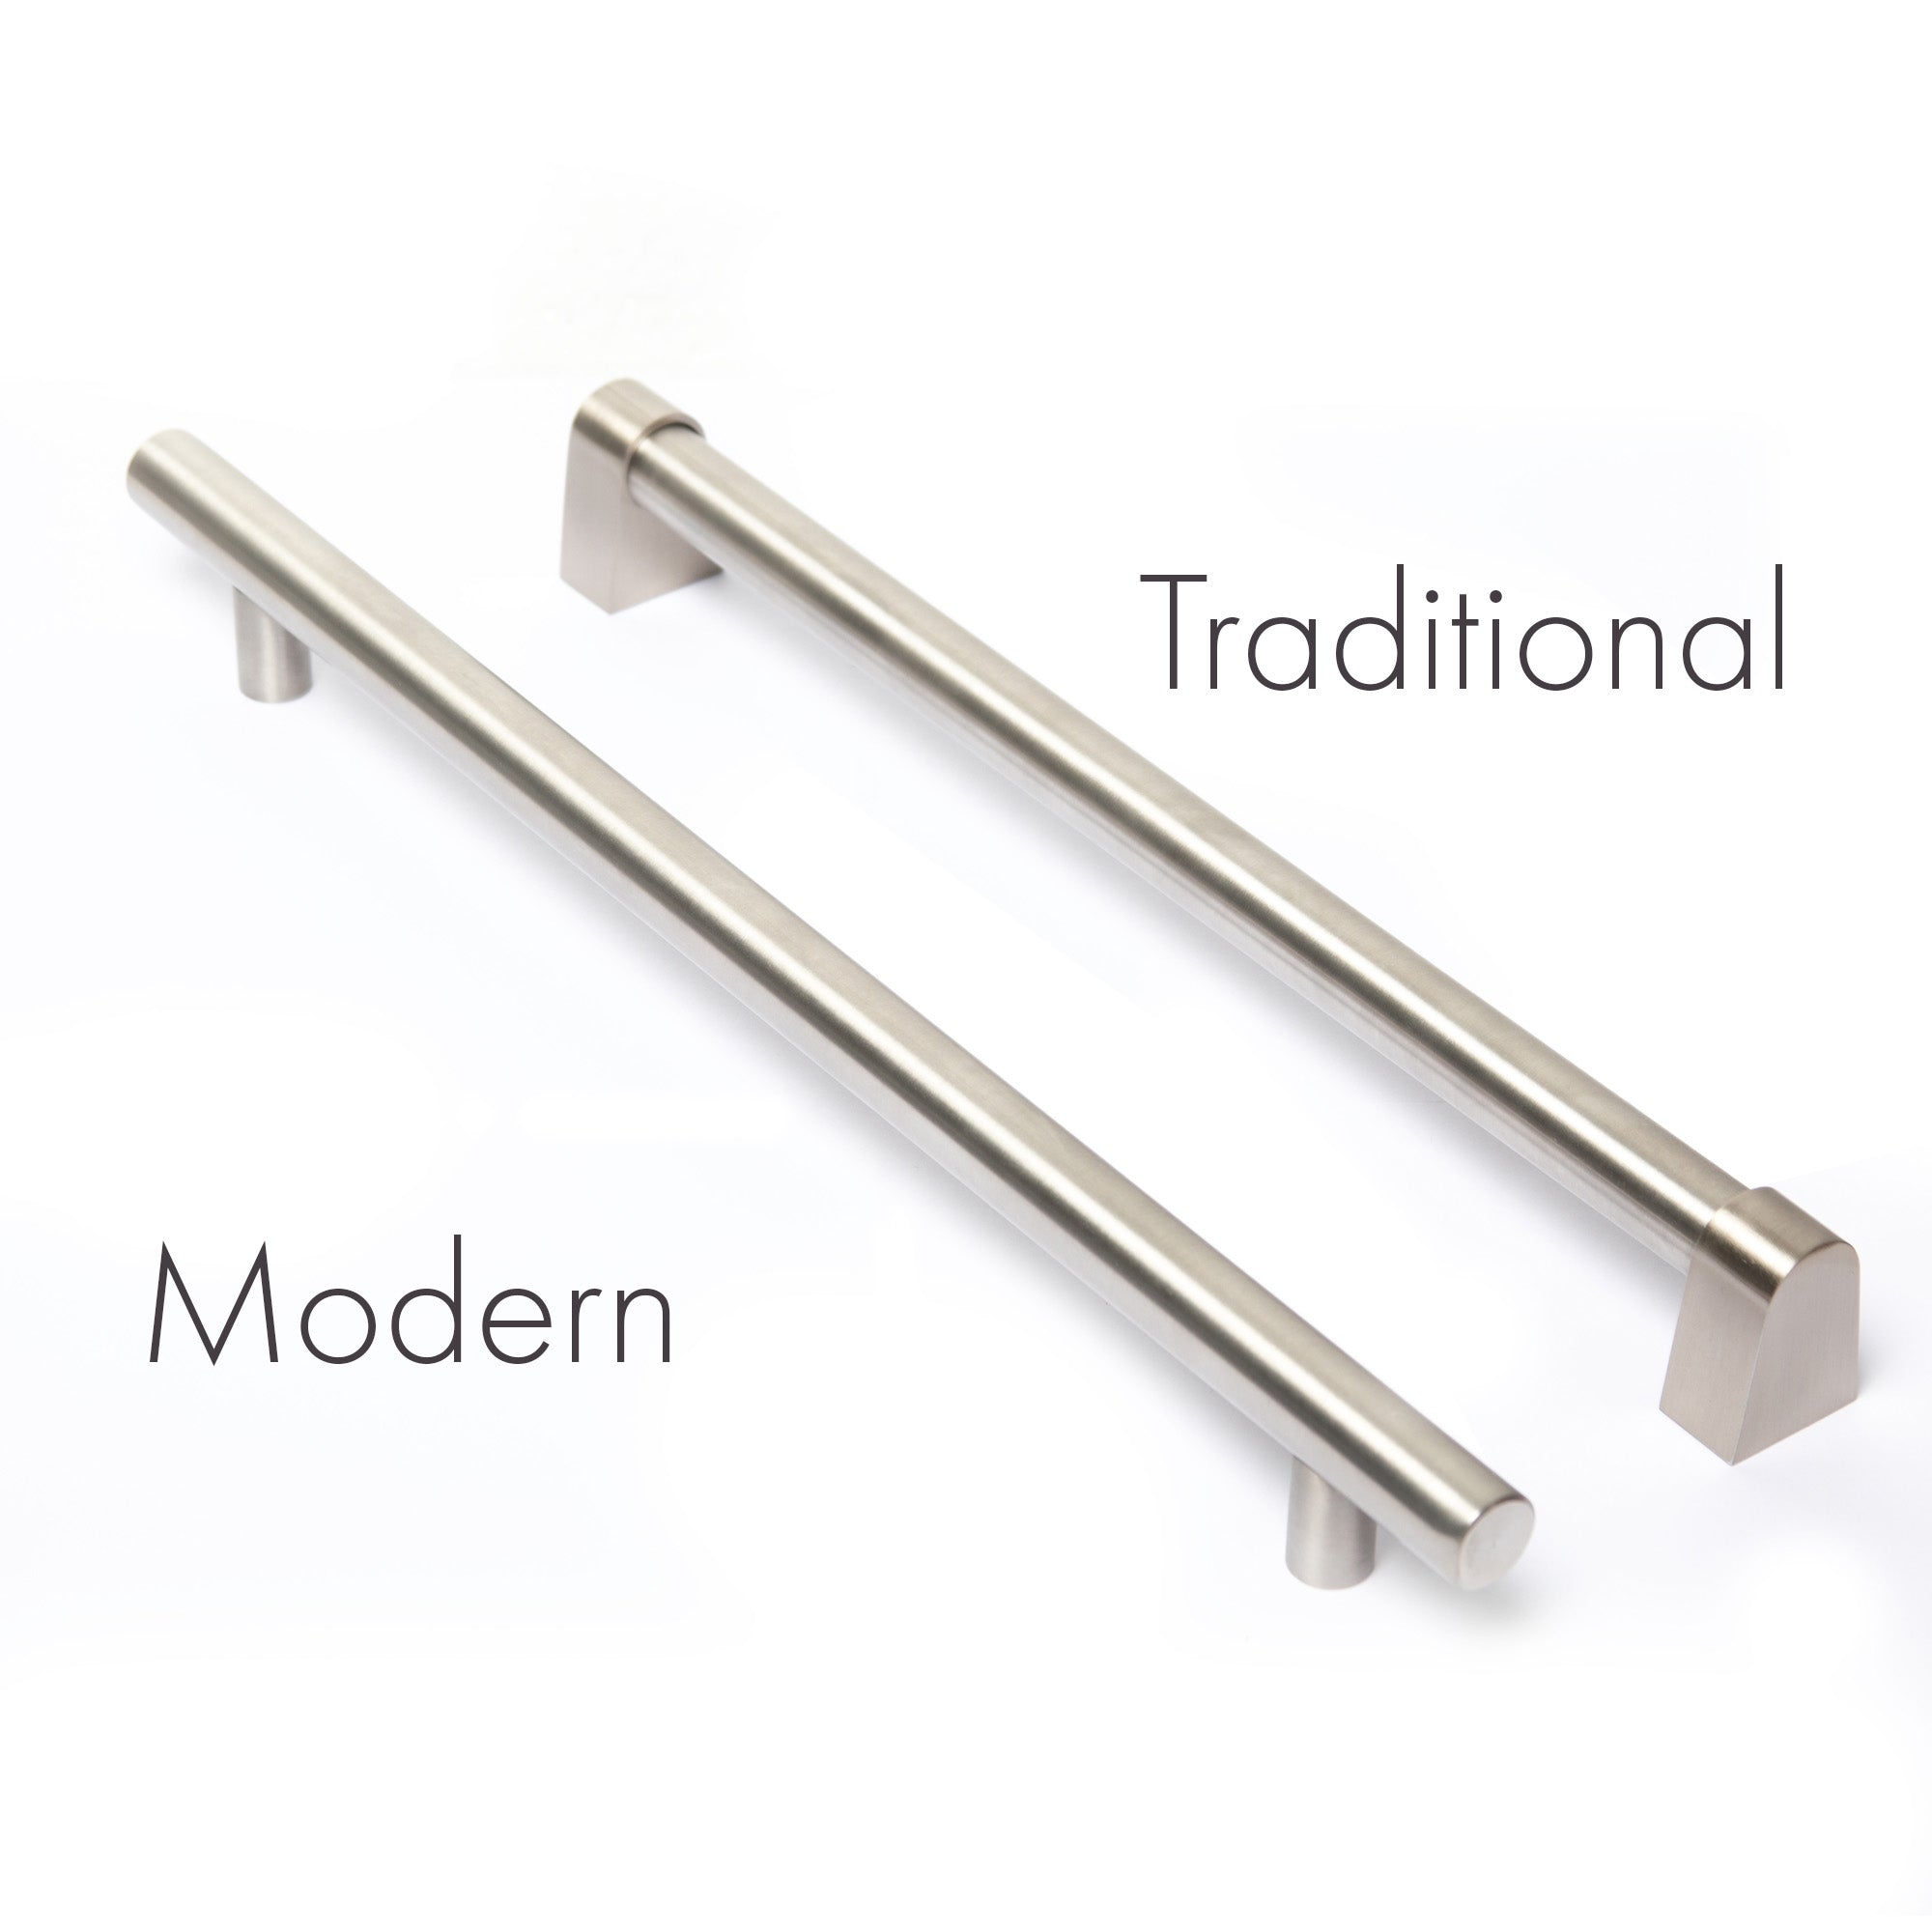 Traditional handle and modern handle side by side comparison.